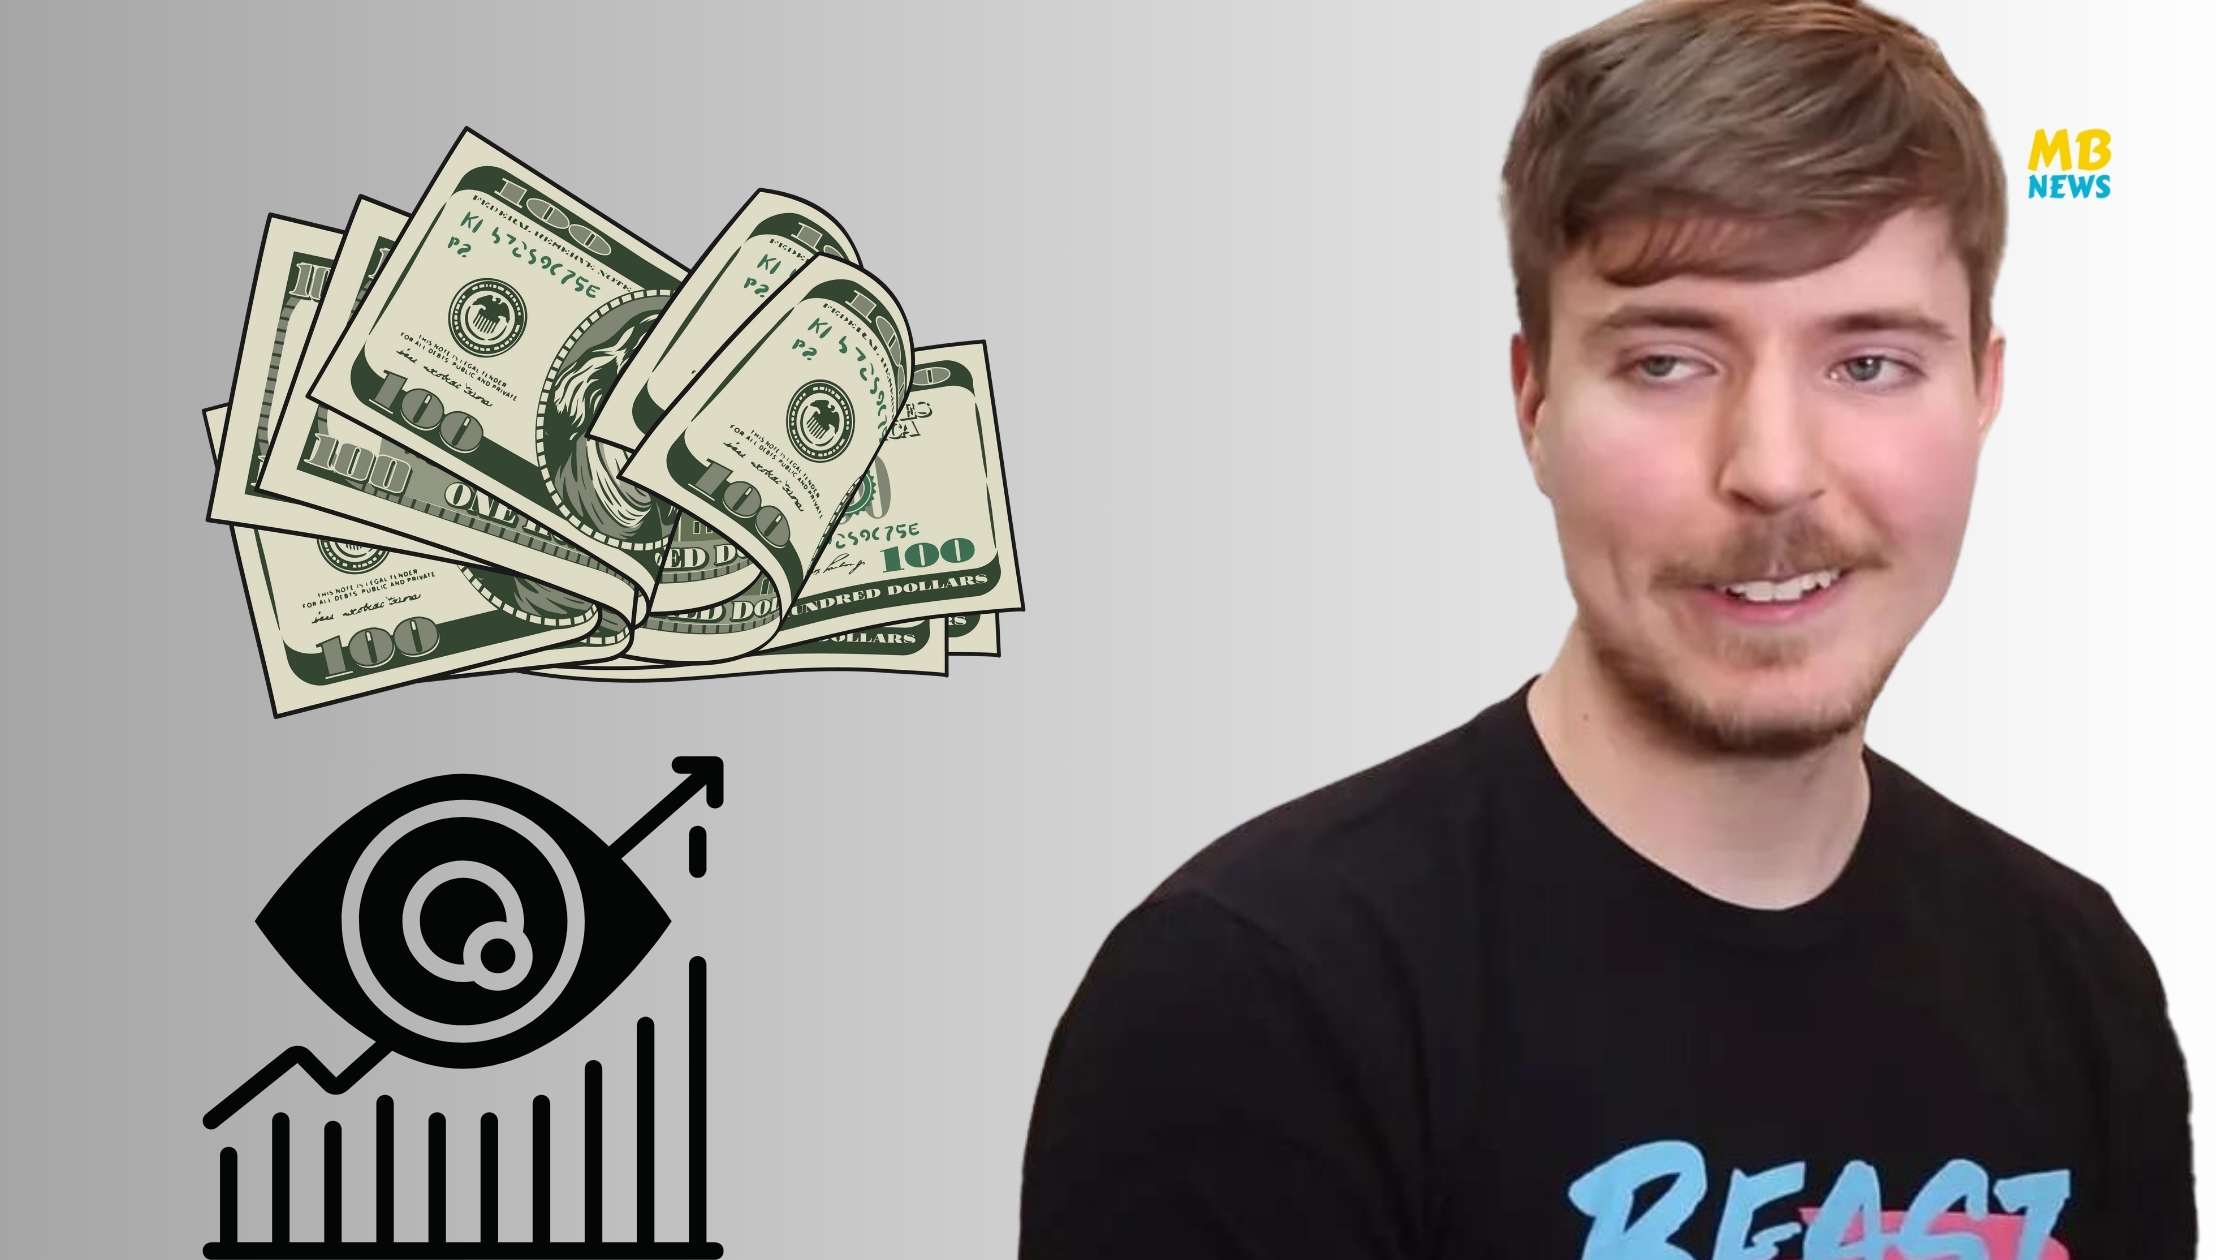 How Much Does MrBeast Make Per Thousand Views?